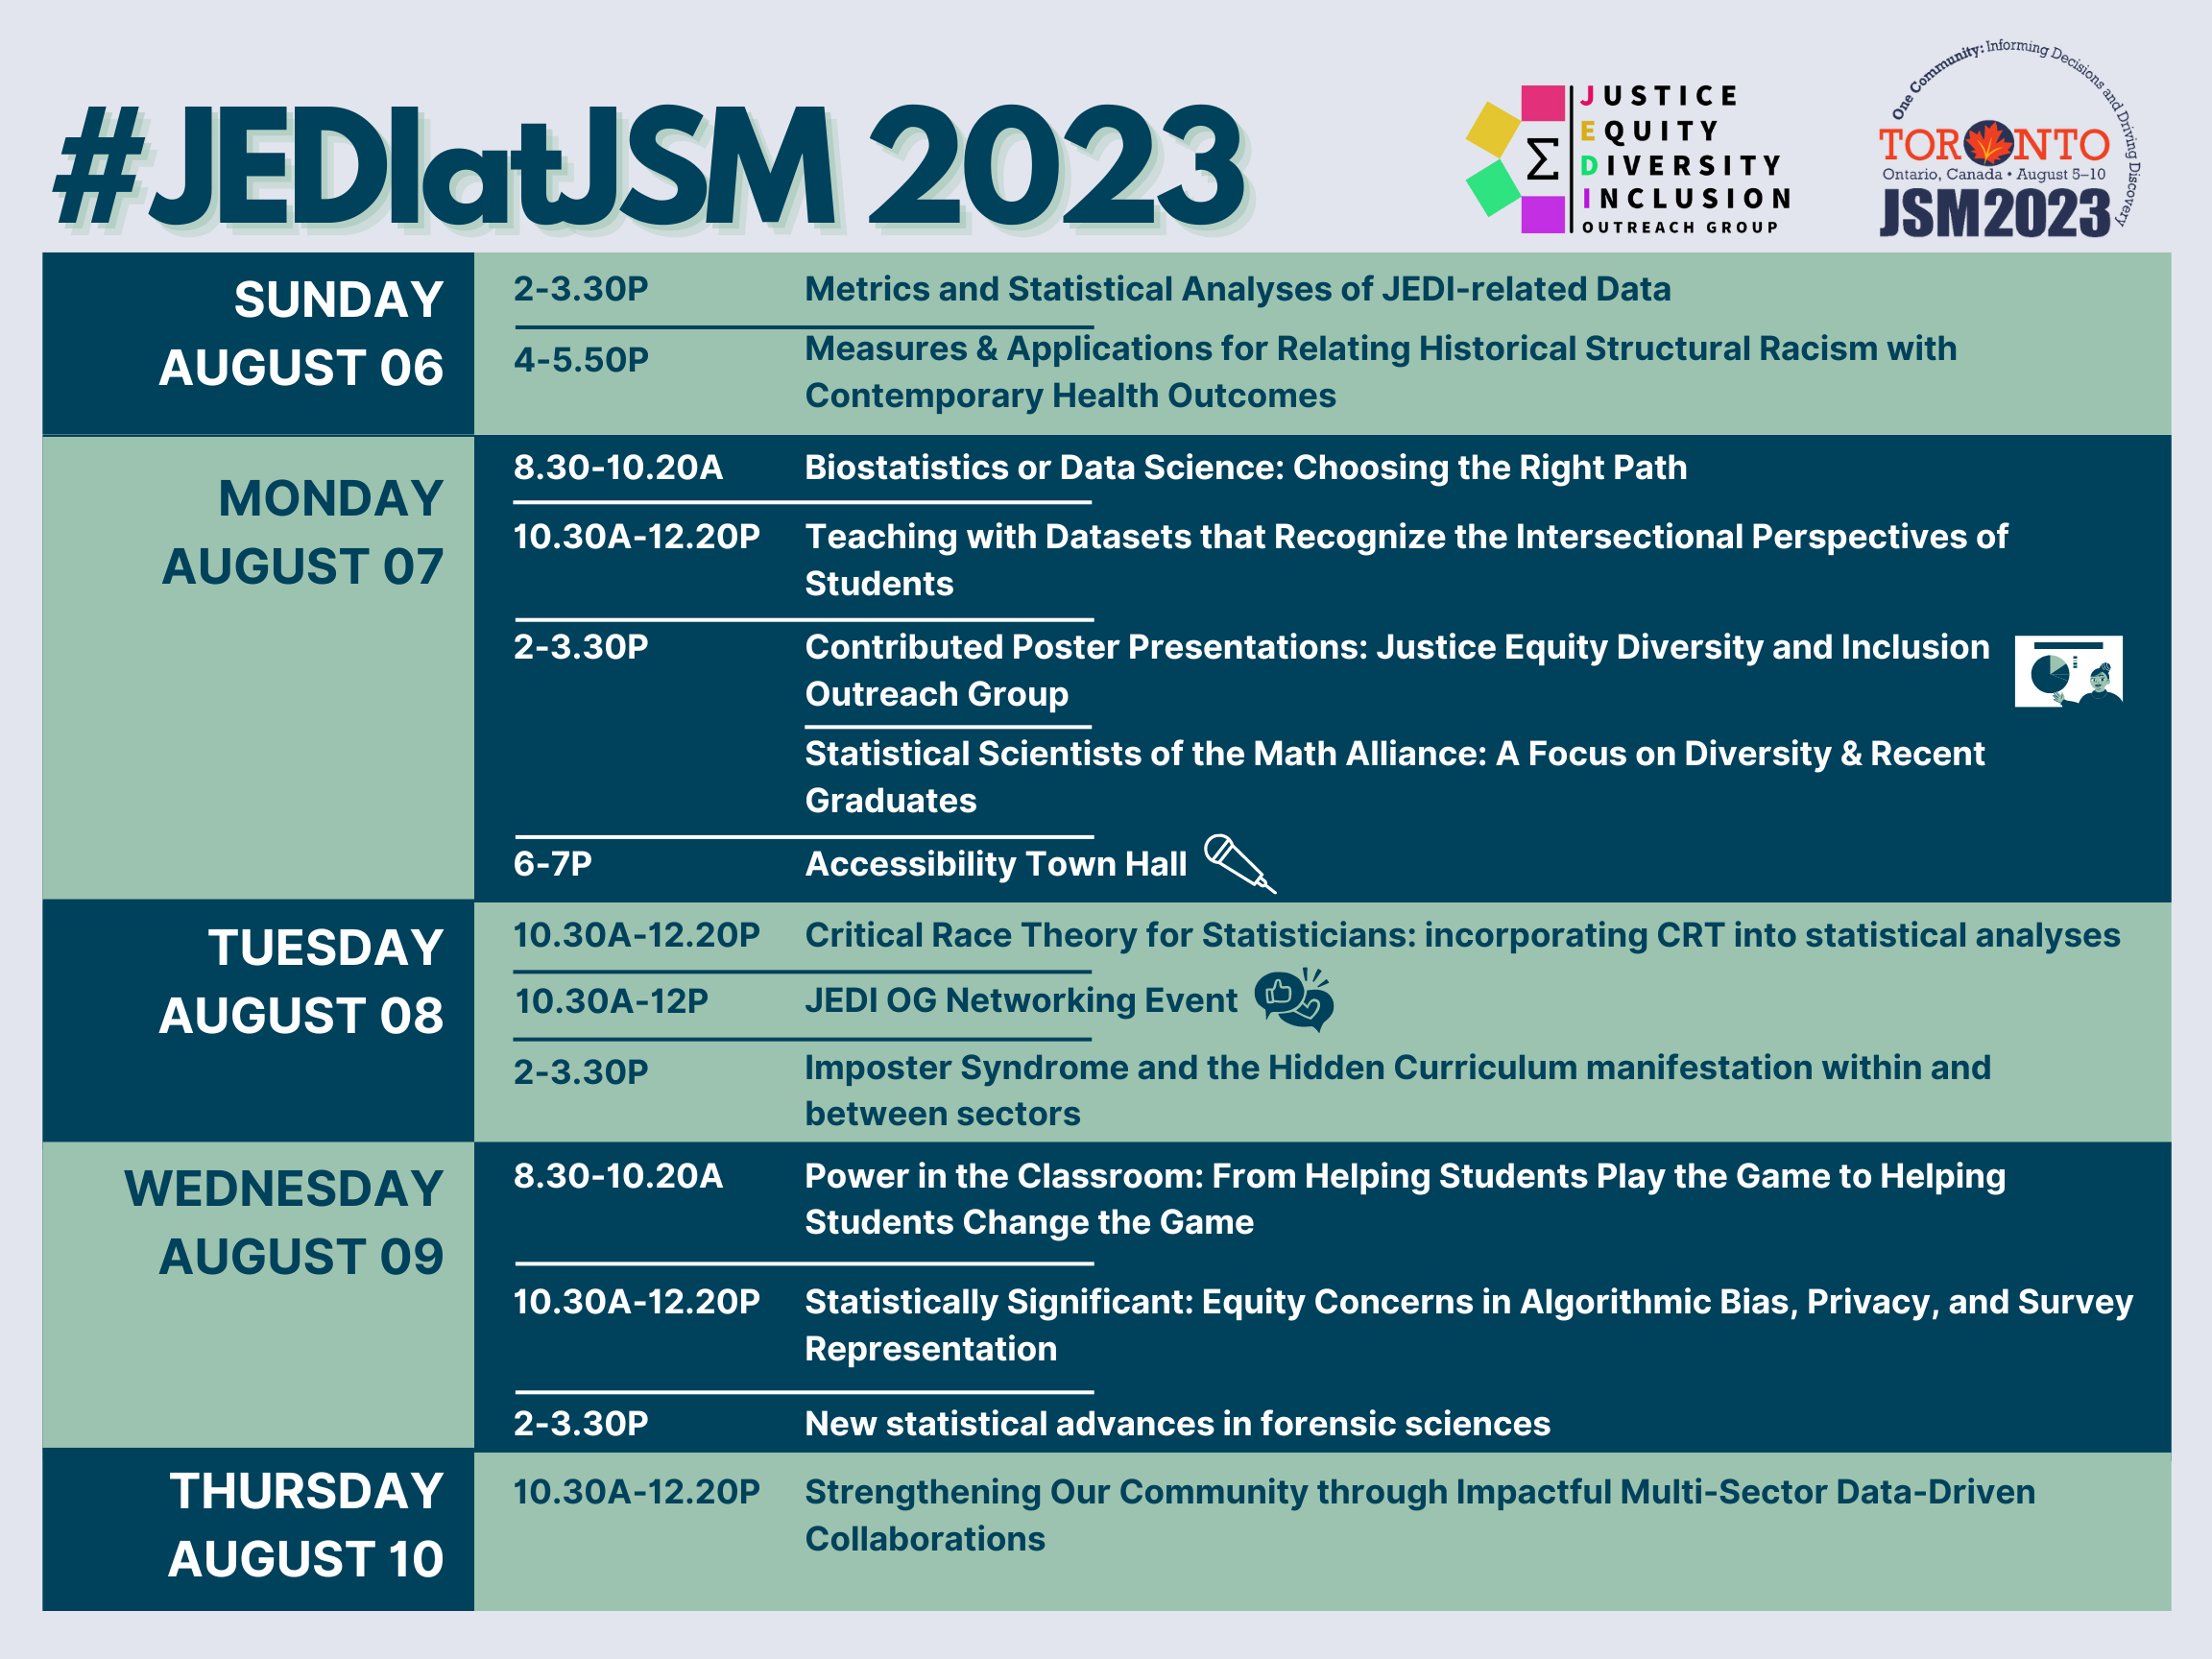 A schedule graphic with the title 'JEDIatJSM 2023' aligned to the left with the JEDI and JSM 2023 logos to the right. Underneath, in alternating navy blue and mint green boxes, are listed the sessions and events affiliated with JEDI occurring during JSM 2023. On Sunday (August 6) there are 2 sessions. The session 'Metrics and Statistical Analyses of JEDI-related Data' is 2-3:30p and the session 'Measures & Applications for Relating Historical Structural Racism with Contemporary Health Outcomes' is from 4-5:50p. On Monday (August 7) there are 4 sessions and 1 event. The session 'Biostatistics or Data Science: Choosing the Right Path' is from 8:30-10:20a. The session 'Teaching with Datasets that Recognize the Intersectional Perspectives of Students' is from 10:30a-12:20p. The sessions 'Contributed Poster Presentations: Justice Equity Diversity and Inclusion Outreach Group' and 'Statistical Scientists of the Math Alliance: A Focus on Diversity & Recent Graduates' are both from 2-3:30p. From 6-7p there will be the 'Accessibility Town Hall'. On Tuesday (August 8) there will be 2 sessions and 1 event. The session 'Critical Race Theory for Statisticians: Incorporating CRT into statistical analyses' is from 10:30a-12.20p. The JEDI OG networking event will be from 10:30a-noon. The session 'Imposter Syndrome and the Hidden Curriculum manifestation within and between sectors' is from 2-3:30p. On Wednesday (August 9) there will be 3 sessions. The session 'Power in the Classroom: From Helping Students Play the Game to Helping Students Change the Game' will be from 8:30-10:20a. The session 'Statistically Significant: Equity Concerns in Algorithmic Bias, Privacy, and Survey Representation' will be from 10:30a-12:20p. The session 'New statistical advances in forensic sciences' will be from 2-3:30p. On Thursday (August 10) there will be 1 session, 'Strengthening Out Community through Impactful Multi-Sector Collaborations' from 10:30a-12:20p.